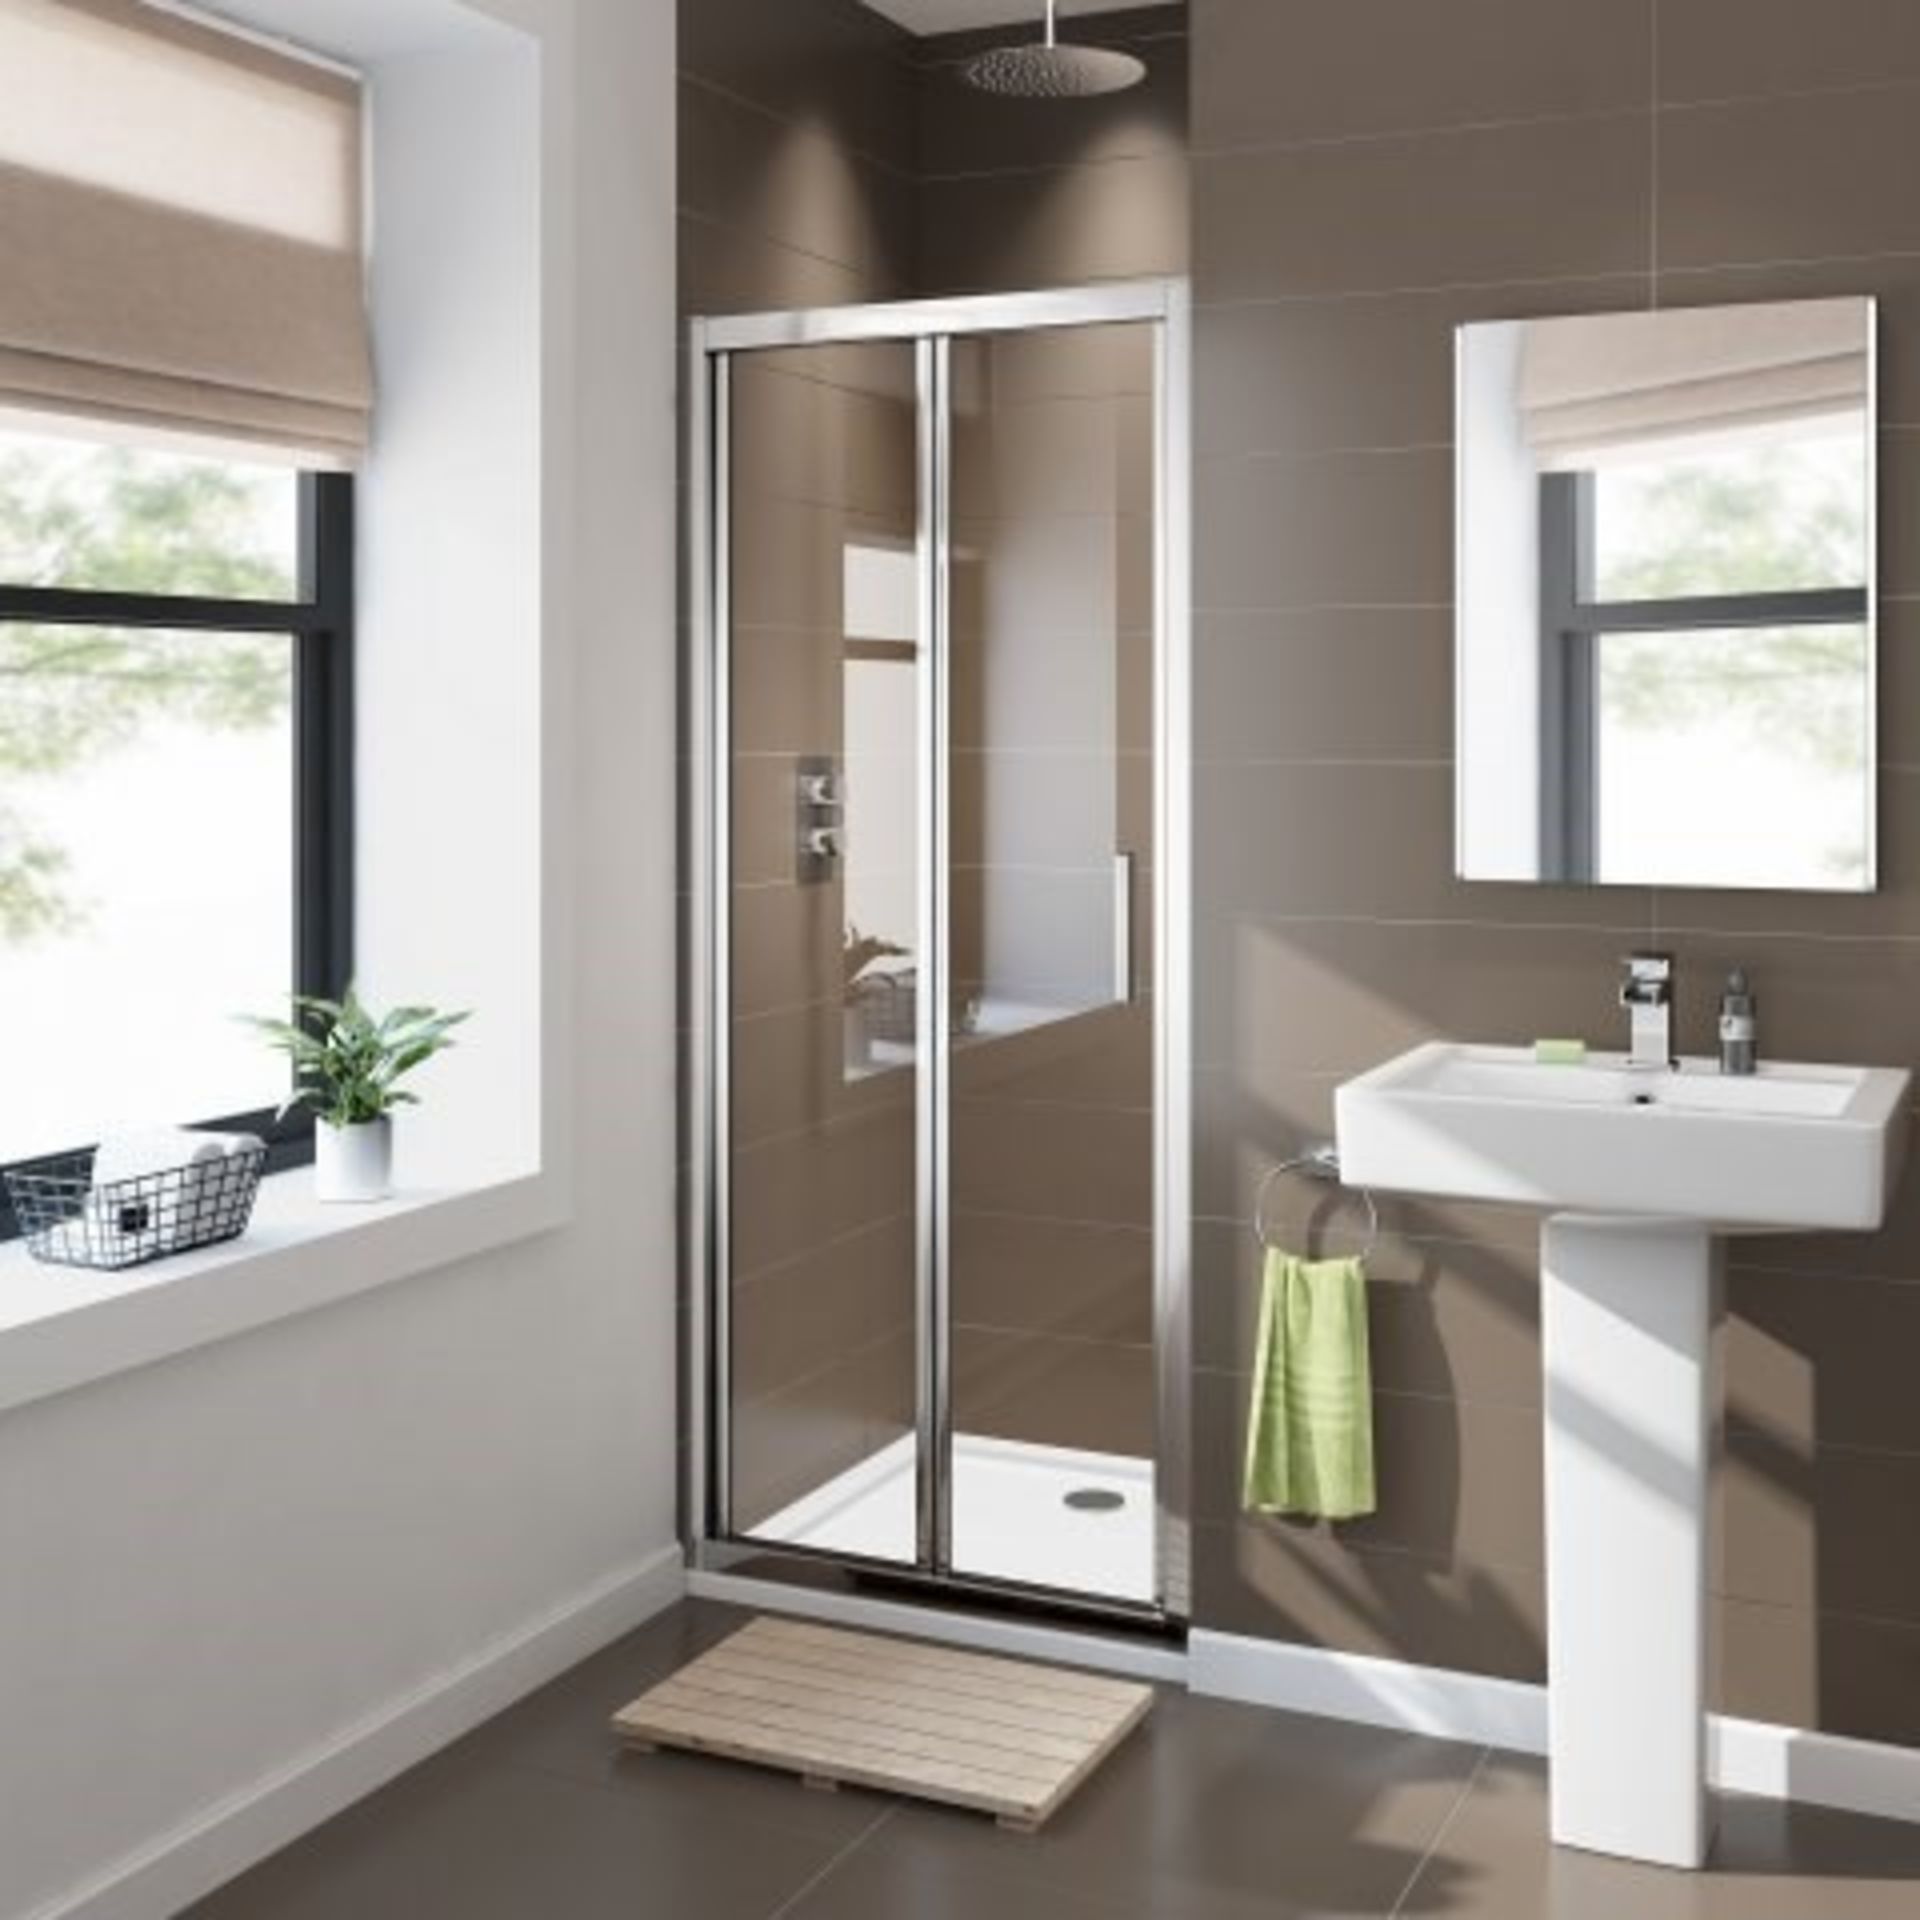 NEW Twyfords 700mm - 8mm - Premium EasyClean Bifold Shower Door. RRP £379.99.Durability to wi... - Image 2 of 2